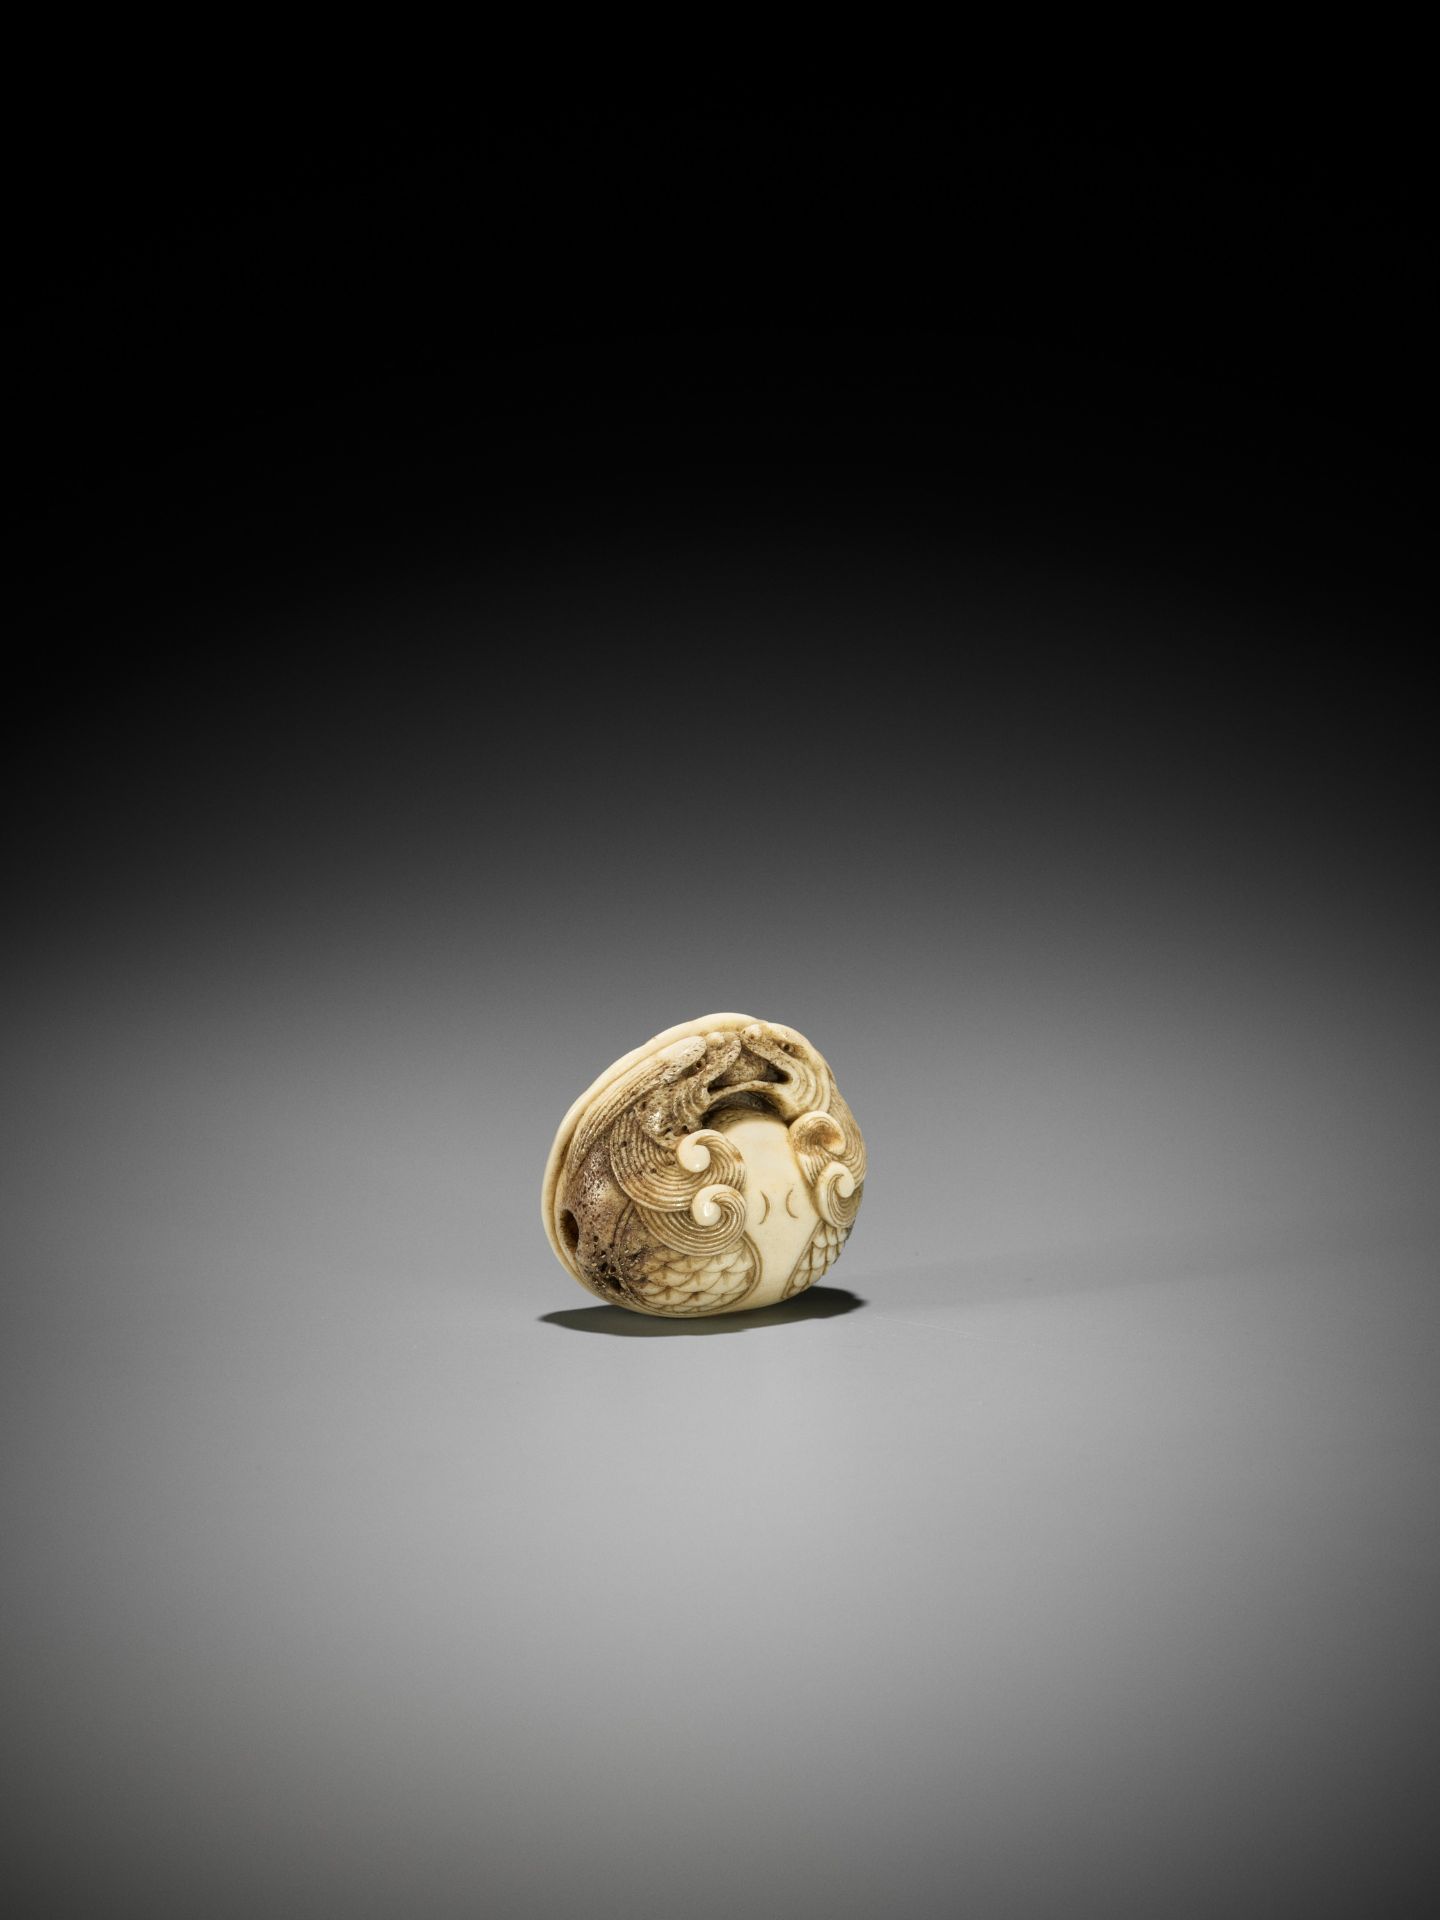 A FINE STAG ANTLER NETSUKE OF A DOUBLE DRAGON-HEADED MOKUGYO - Image 8 of 11